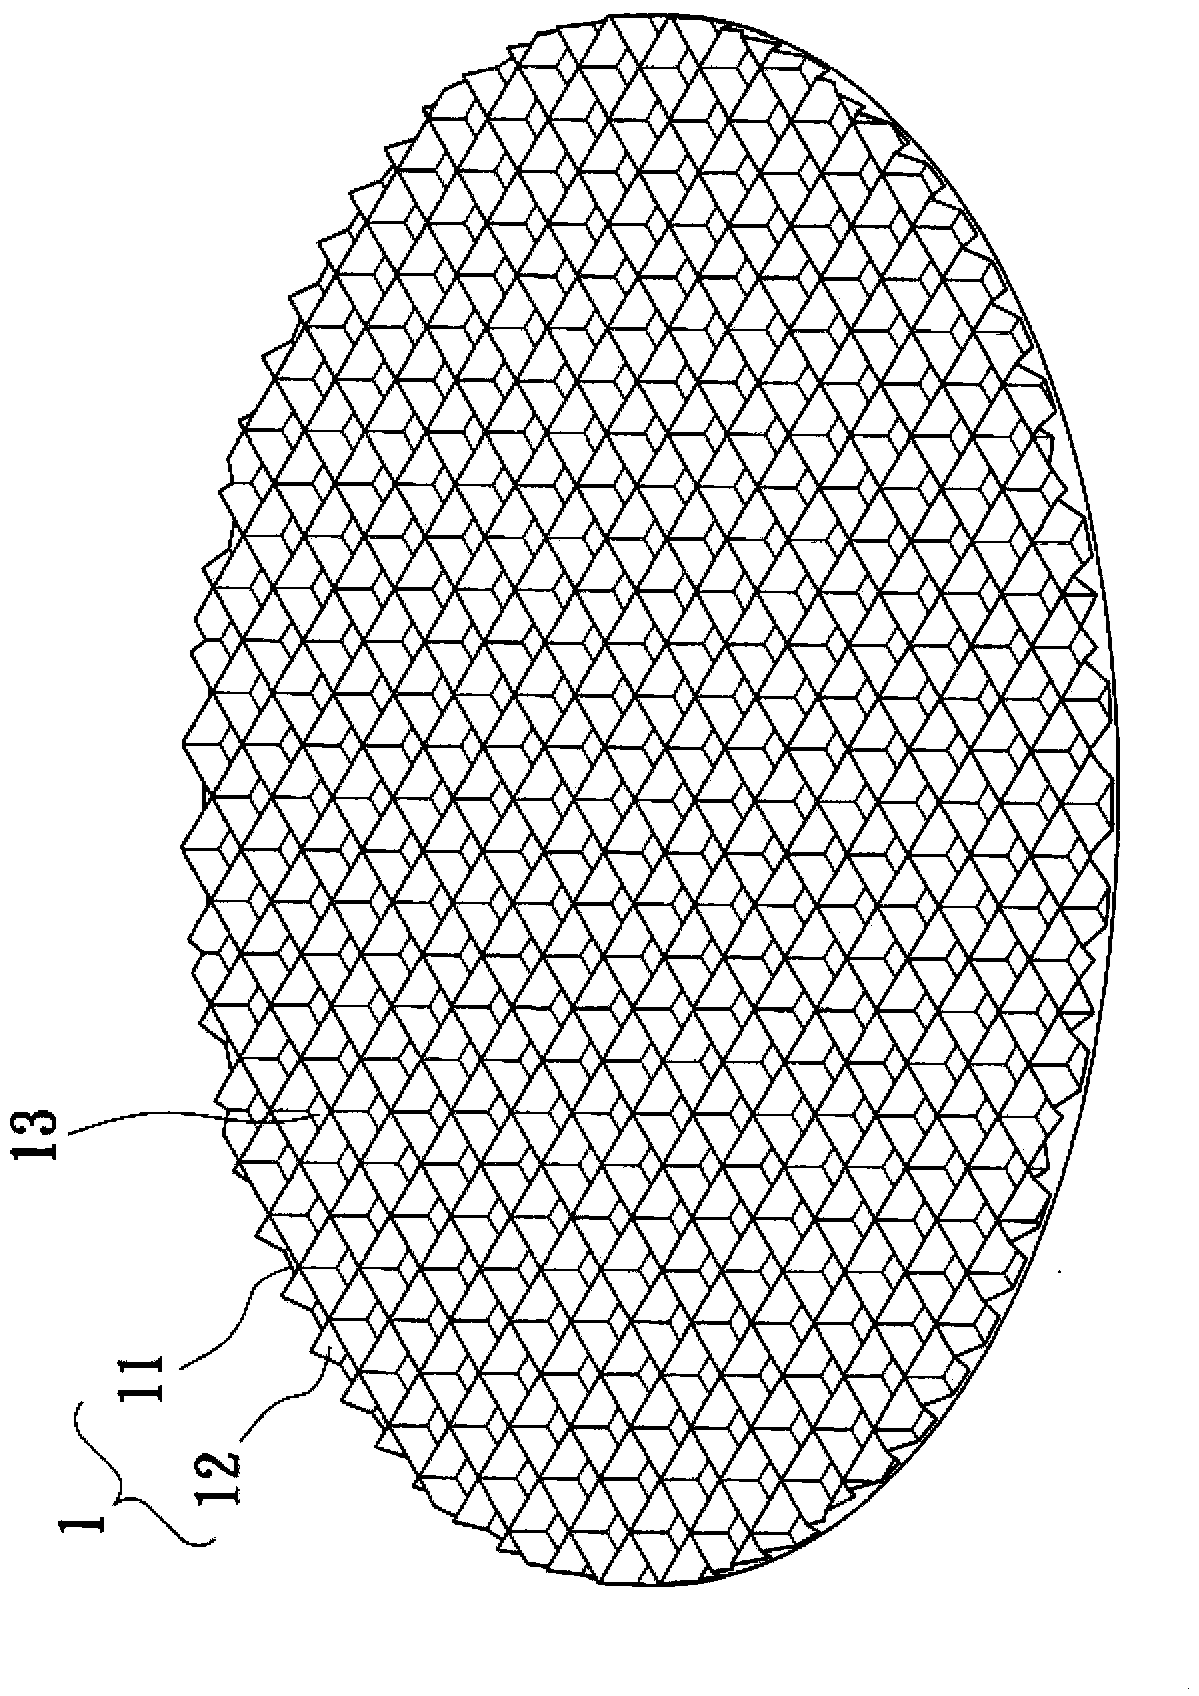 Patterned base material with emitting angle convergent and light-emitting diode element